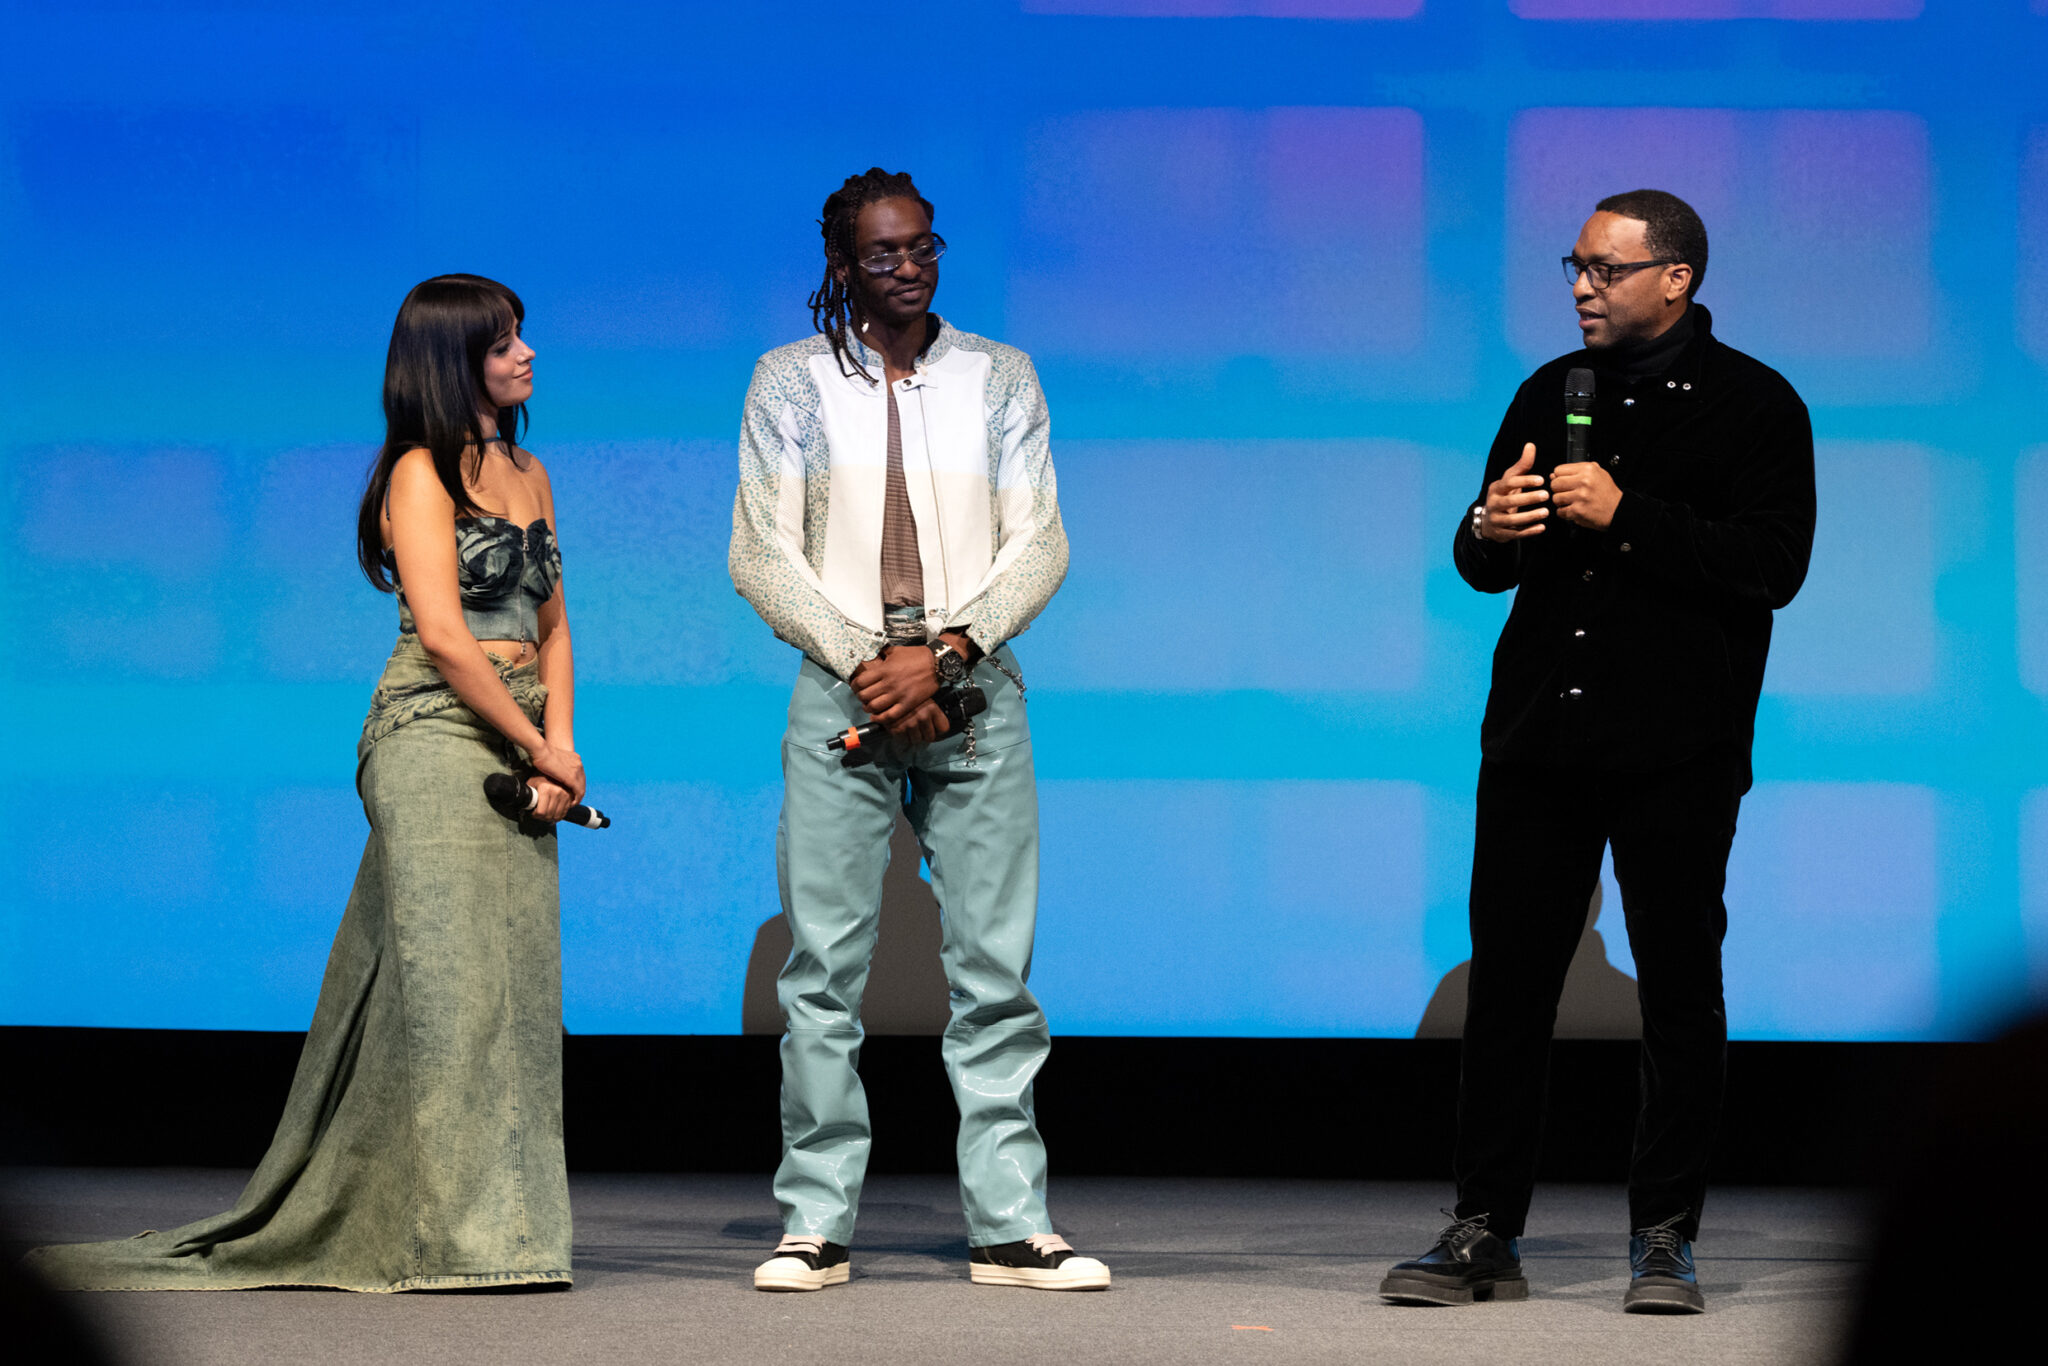 A Mexican-Cuban woman with long black hair in a denim outfit, a Black man with a white dress shirt and blue pants, and a Black man dressed in all black, stand on stage at Eccles Theatre.